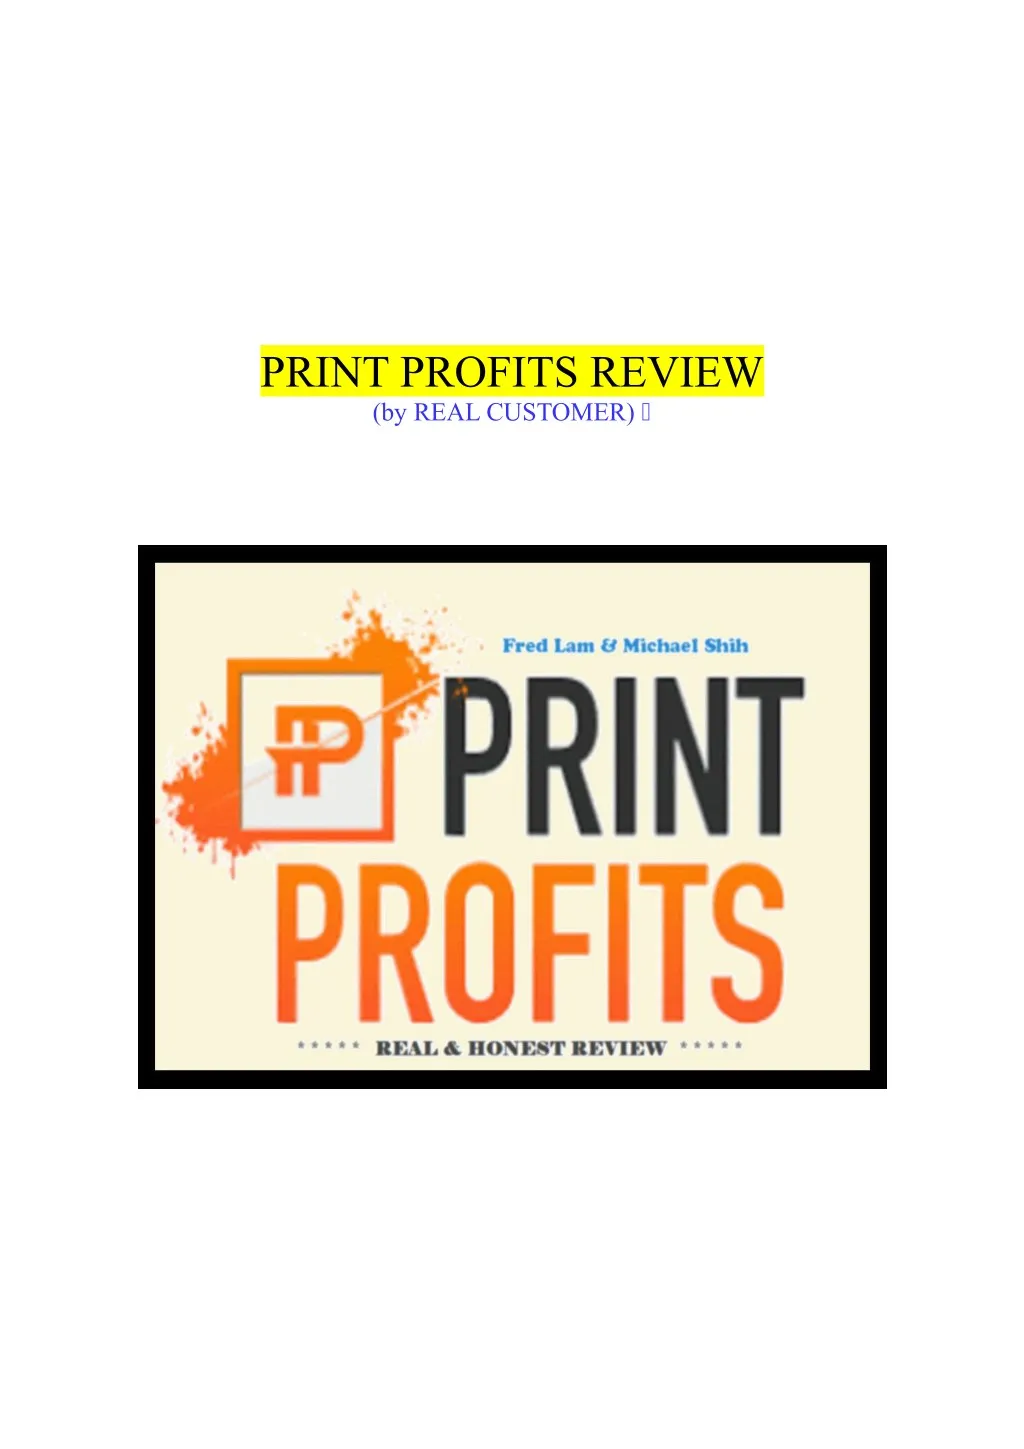 print profits review by real customer